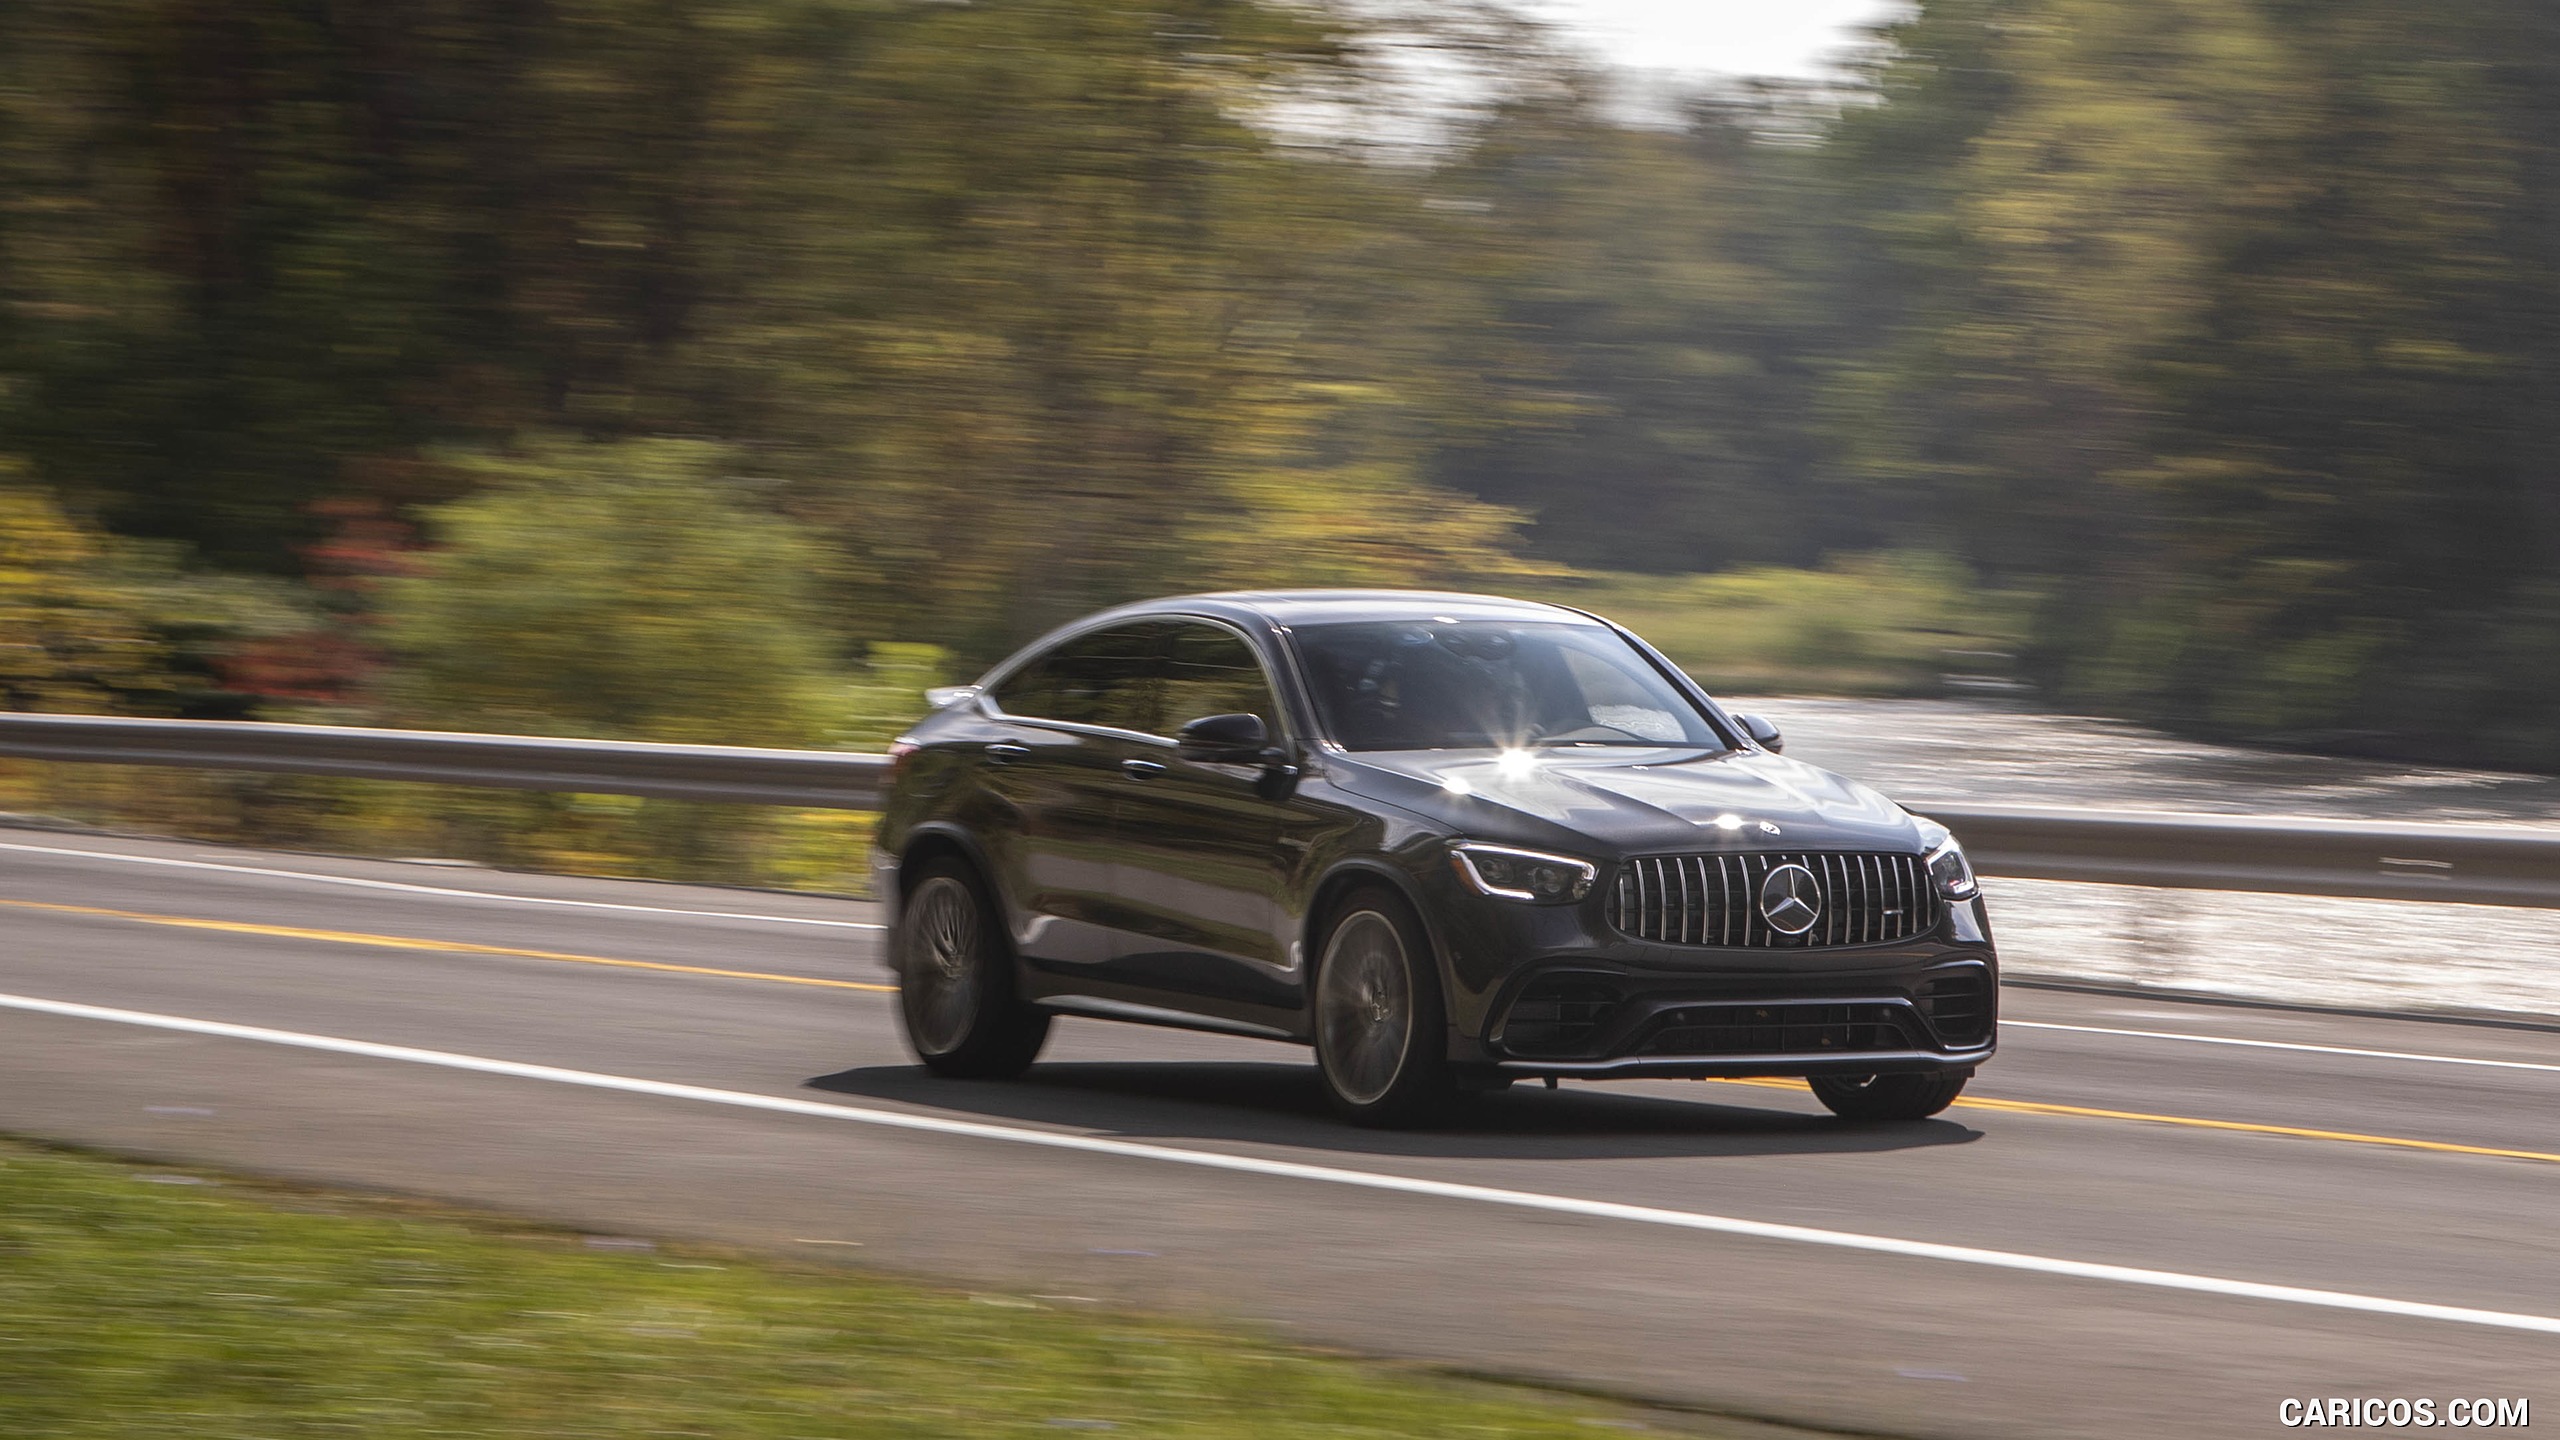 2020 Mercedes-AMG GLC 63 S Coupe (US-Spec) - Front Three-Quarter, #30 of 102